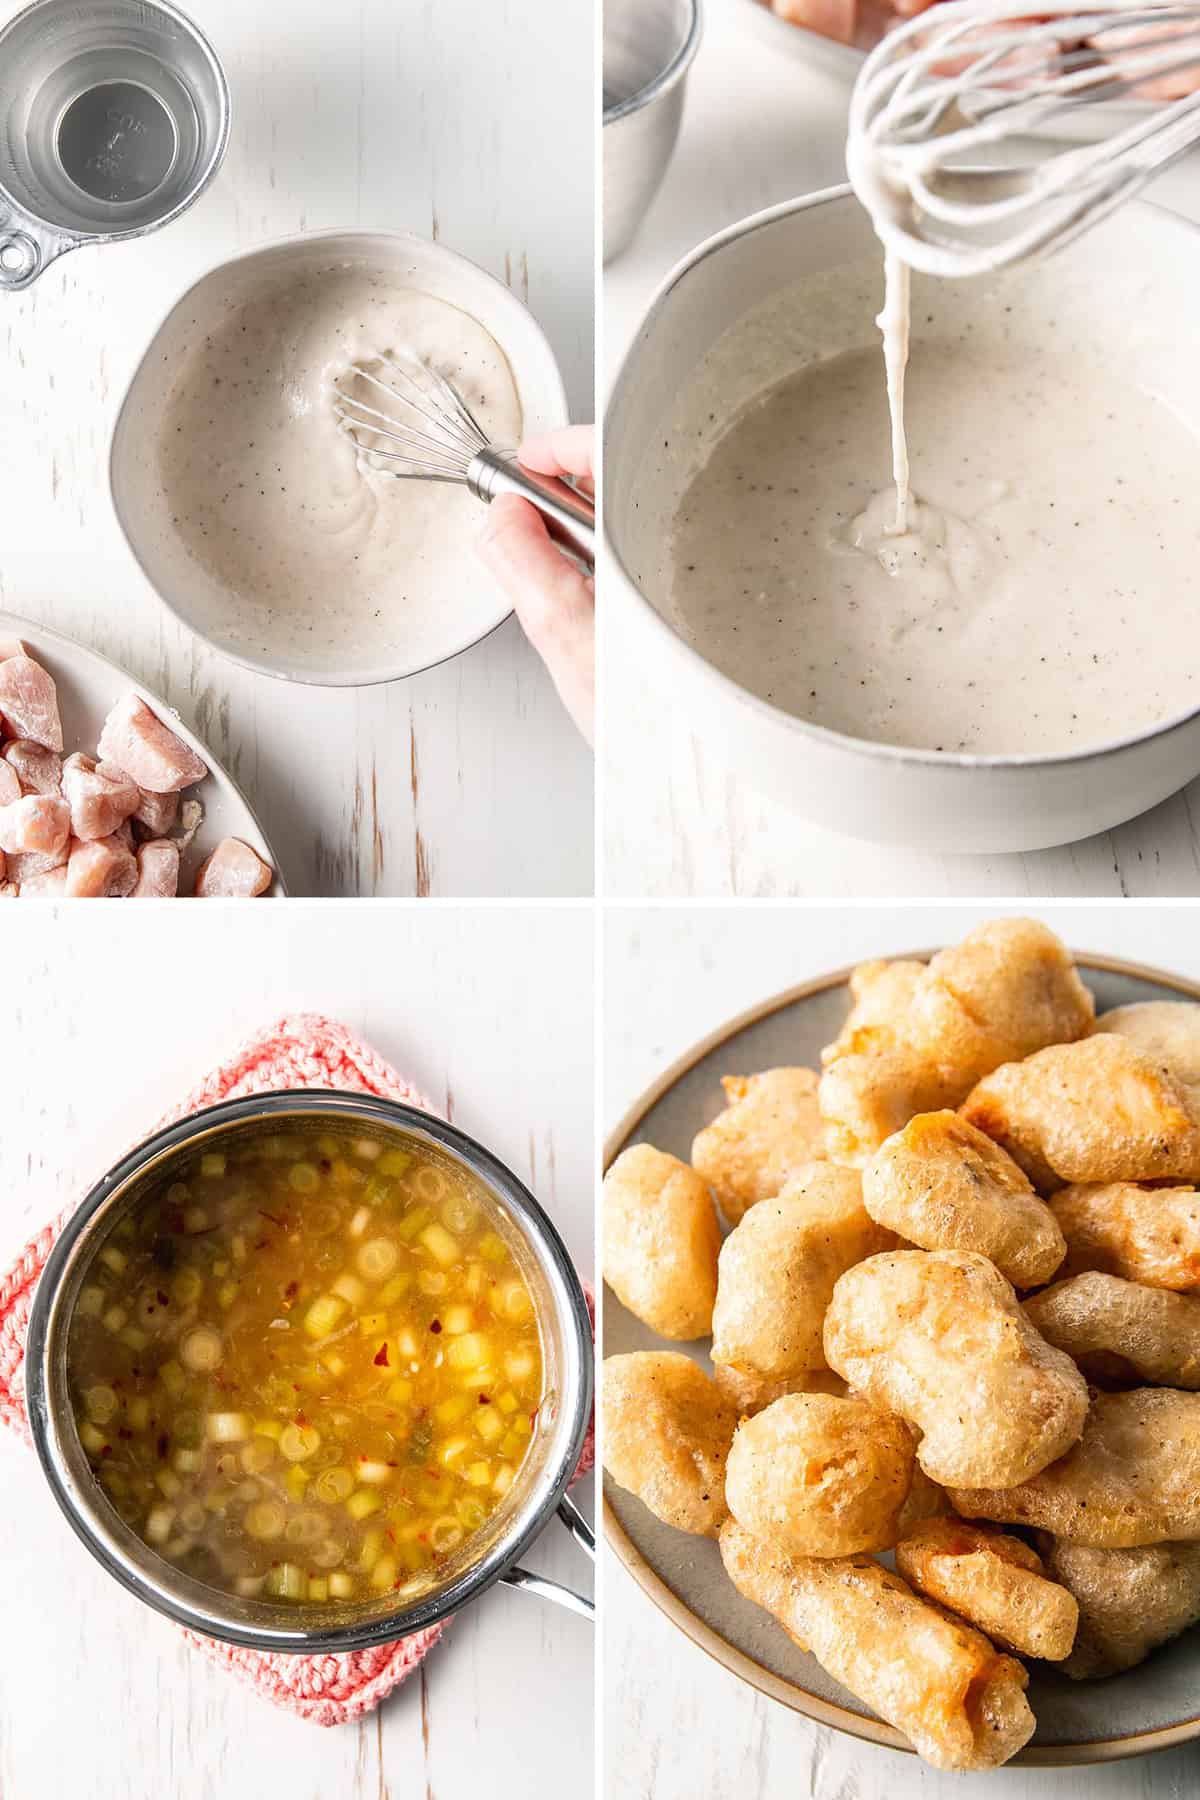 Whisking batter, batter dripping from whisk, sauce in a small saucepan, golden fried chicken bites on a plate.